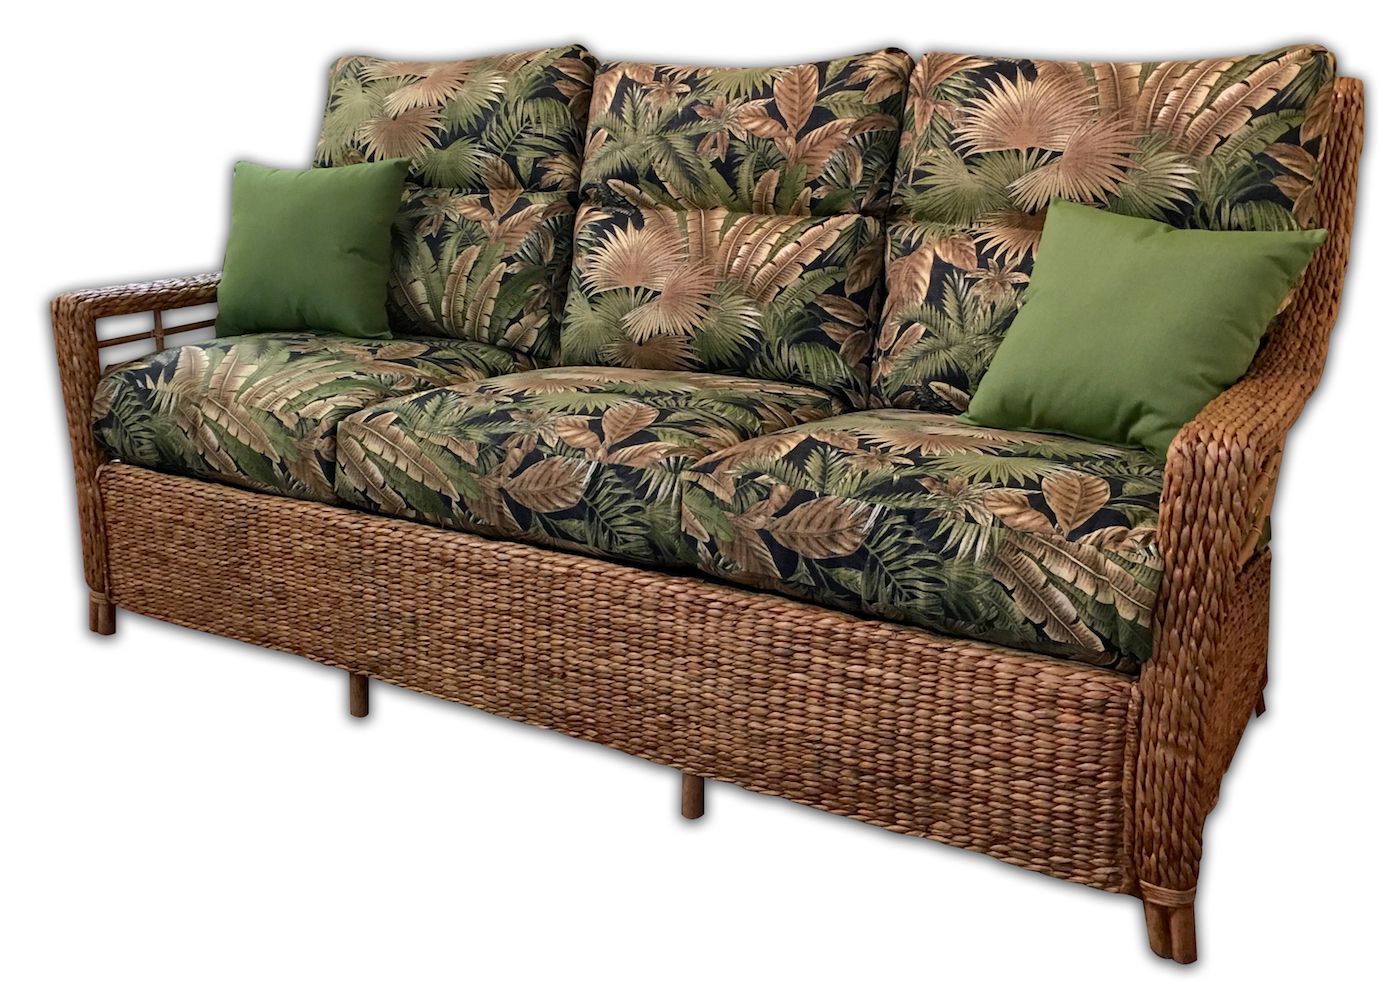 Martinique Seagrass Sofa Pertaining To Natural Seagrass Console Tables (View 3 of 20)